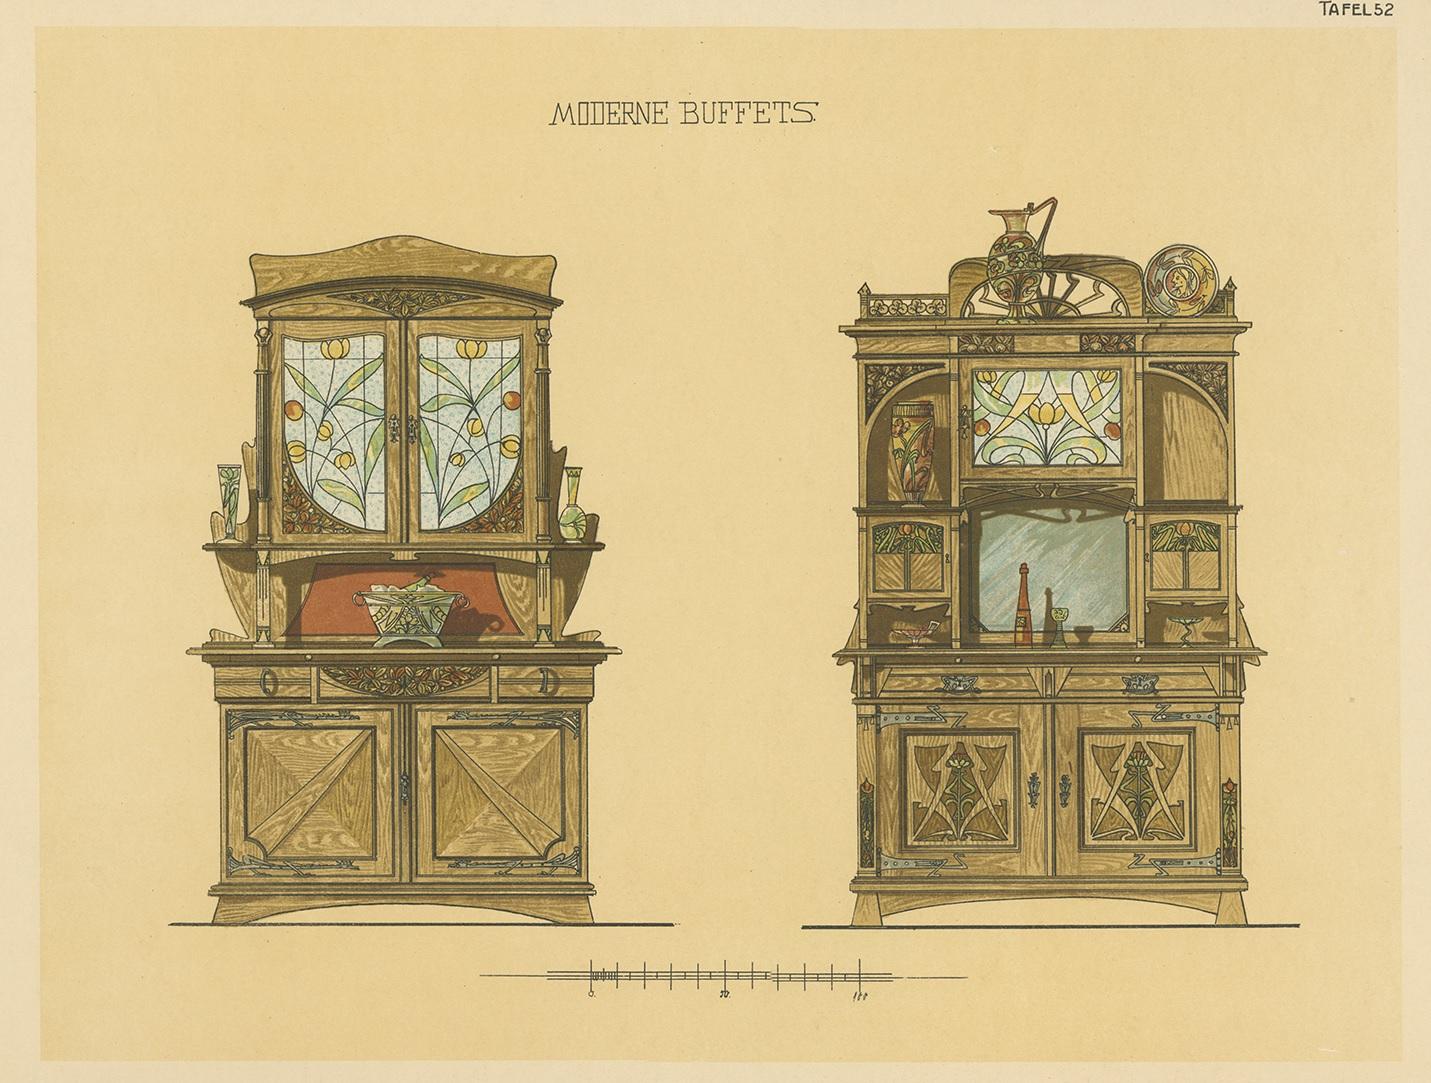 Antique print titled 'Moderne Buffets'. Lithograph of buffets. This print originates from 'Det Moderna Hemmet' by Johannes Kramer. Published by Ferdinand Hey'l, circa 1910.